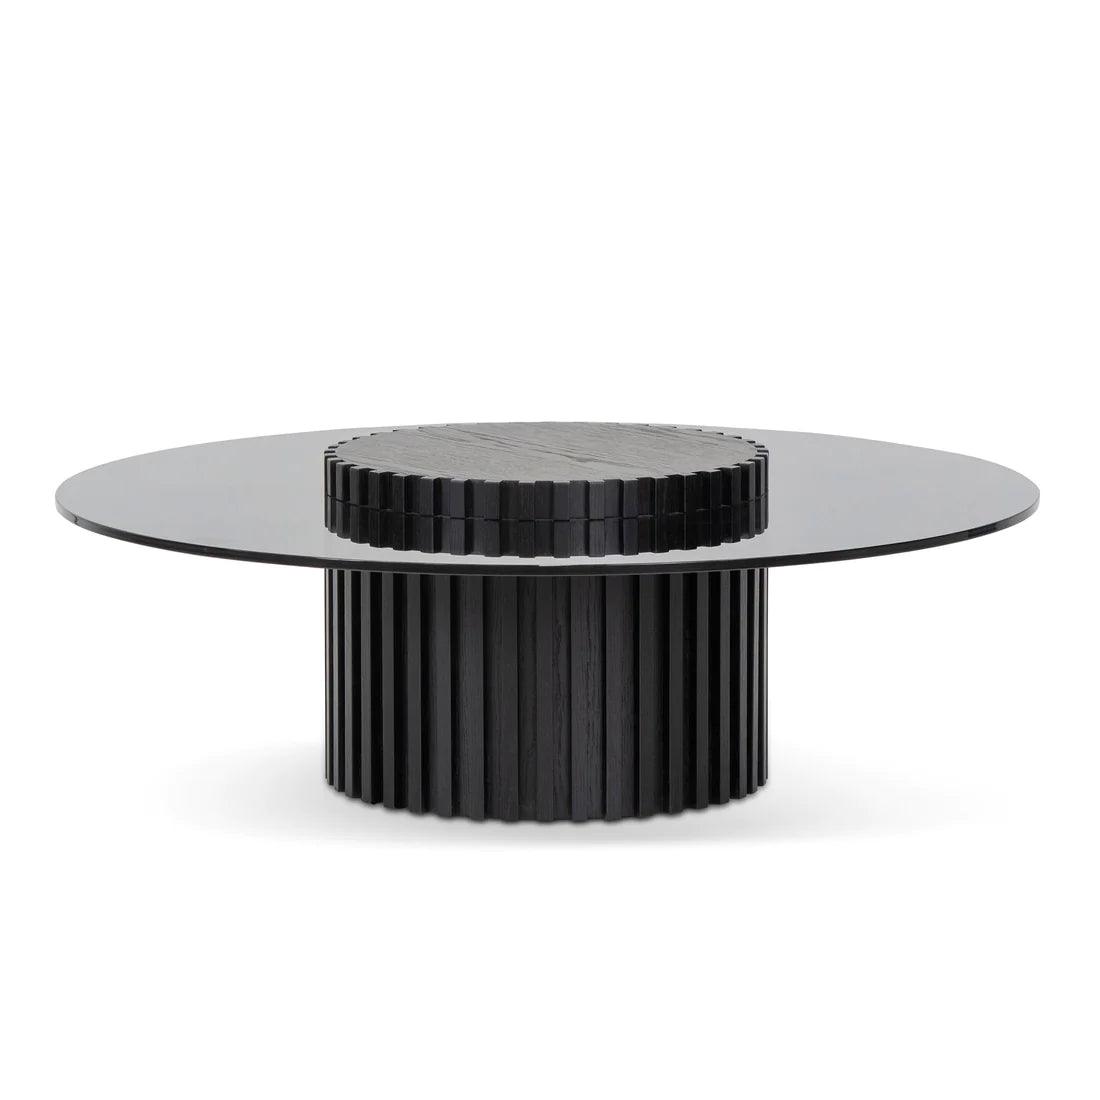 Heather 1.1m Round Glass Cofee Table - Black - Furniture Castle